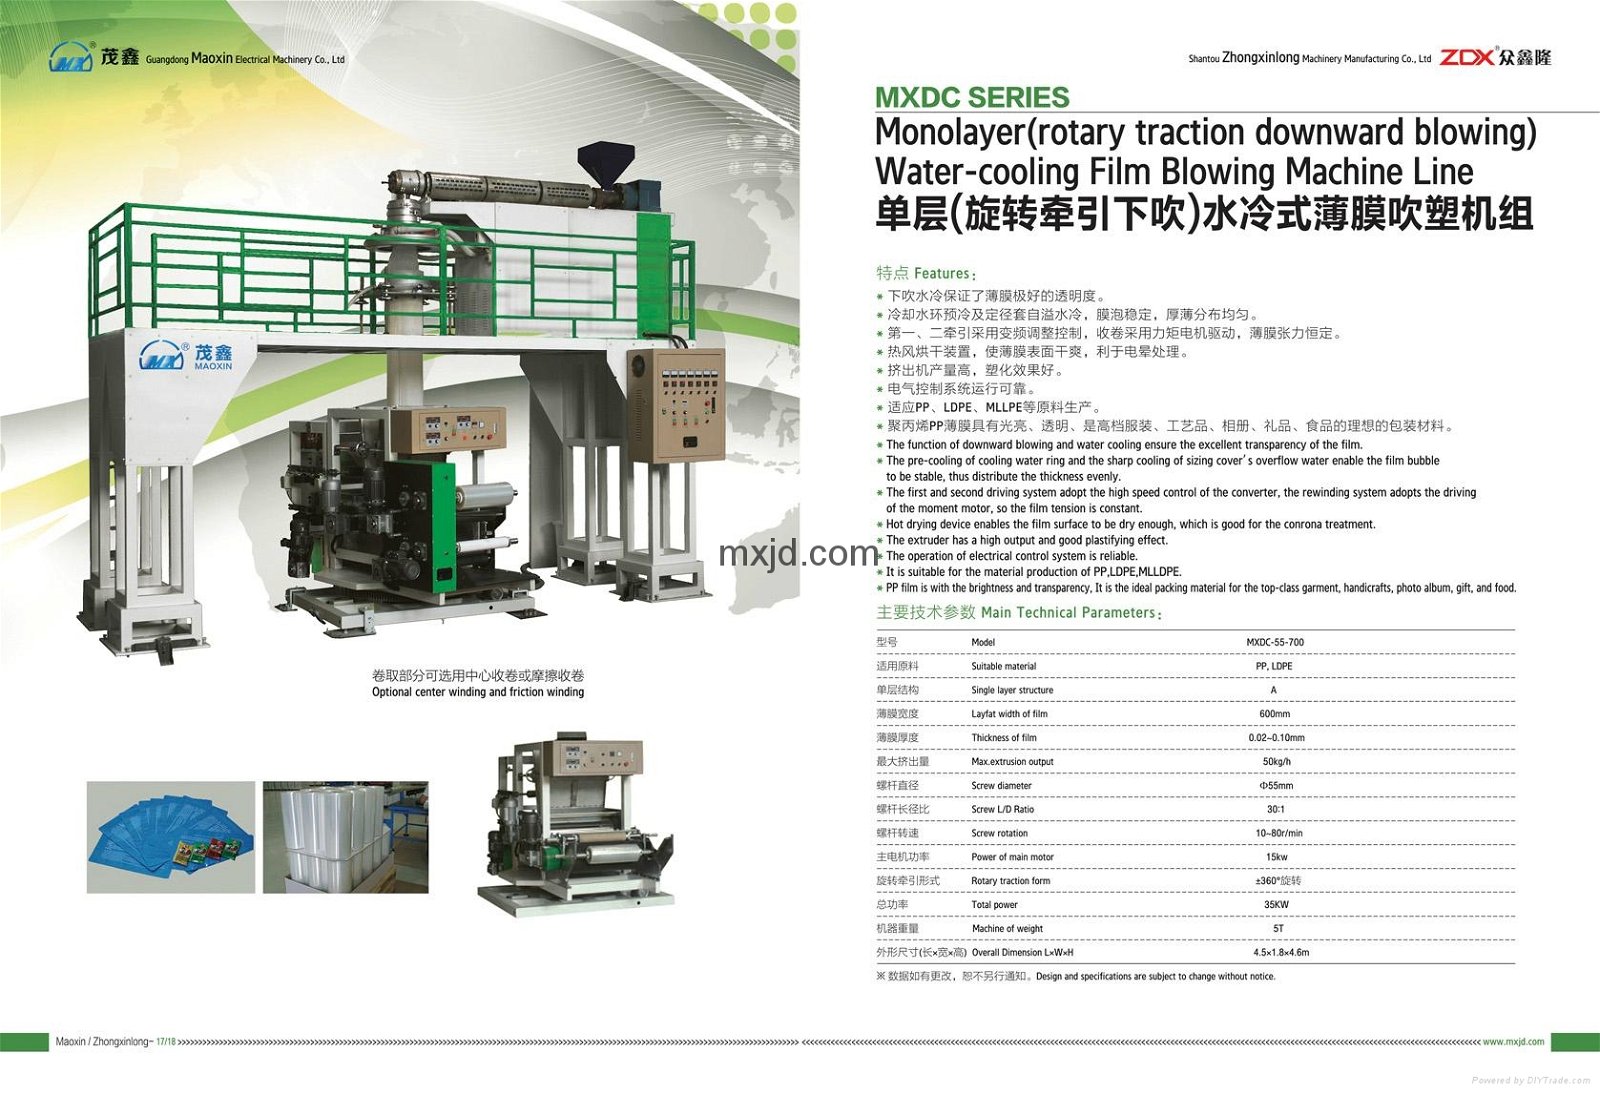 Monolayer Water-cooling Downward Film Blowing Machine 2